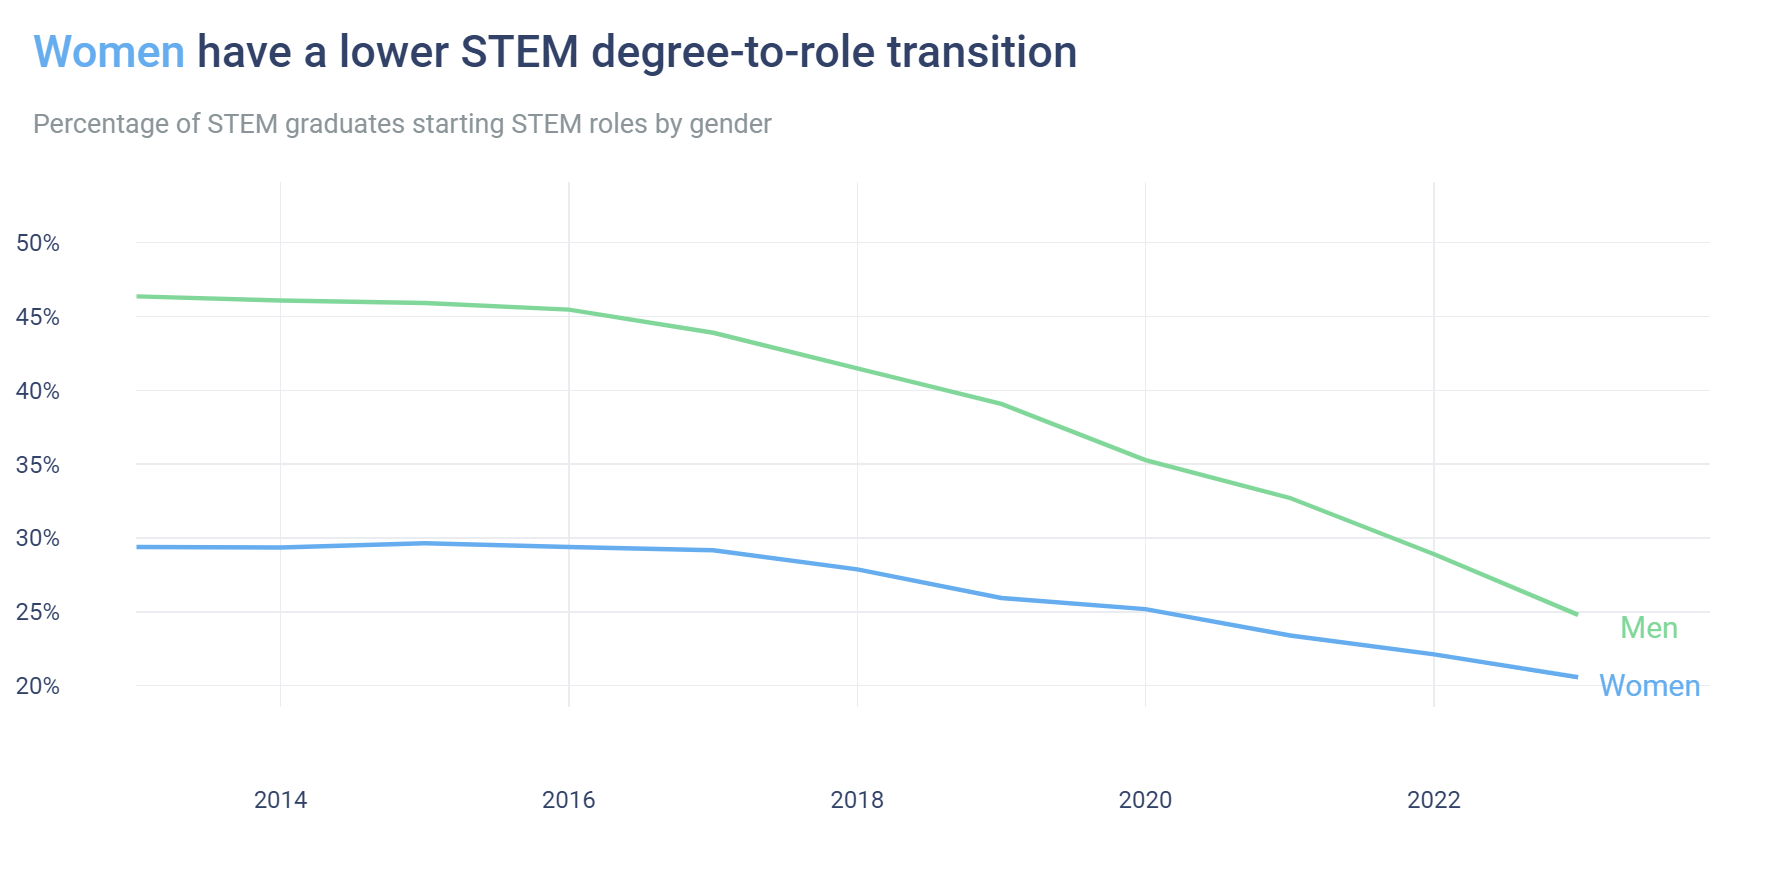 Women transition at a lower rate from STEM degrees to STEM roles